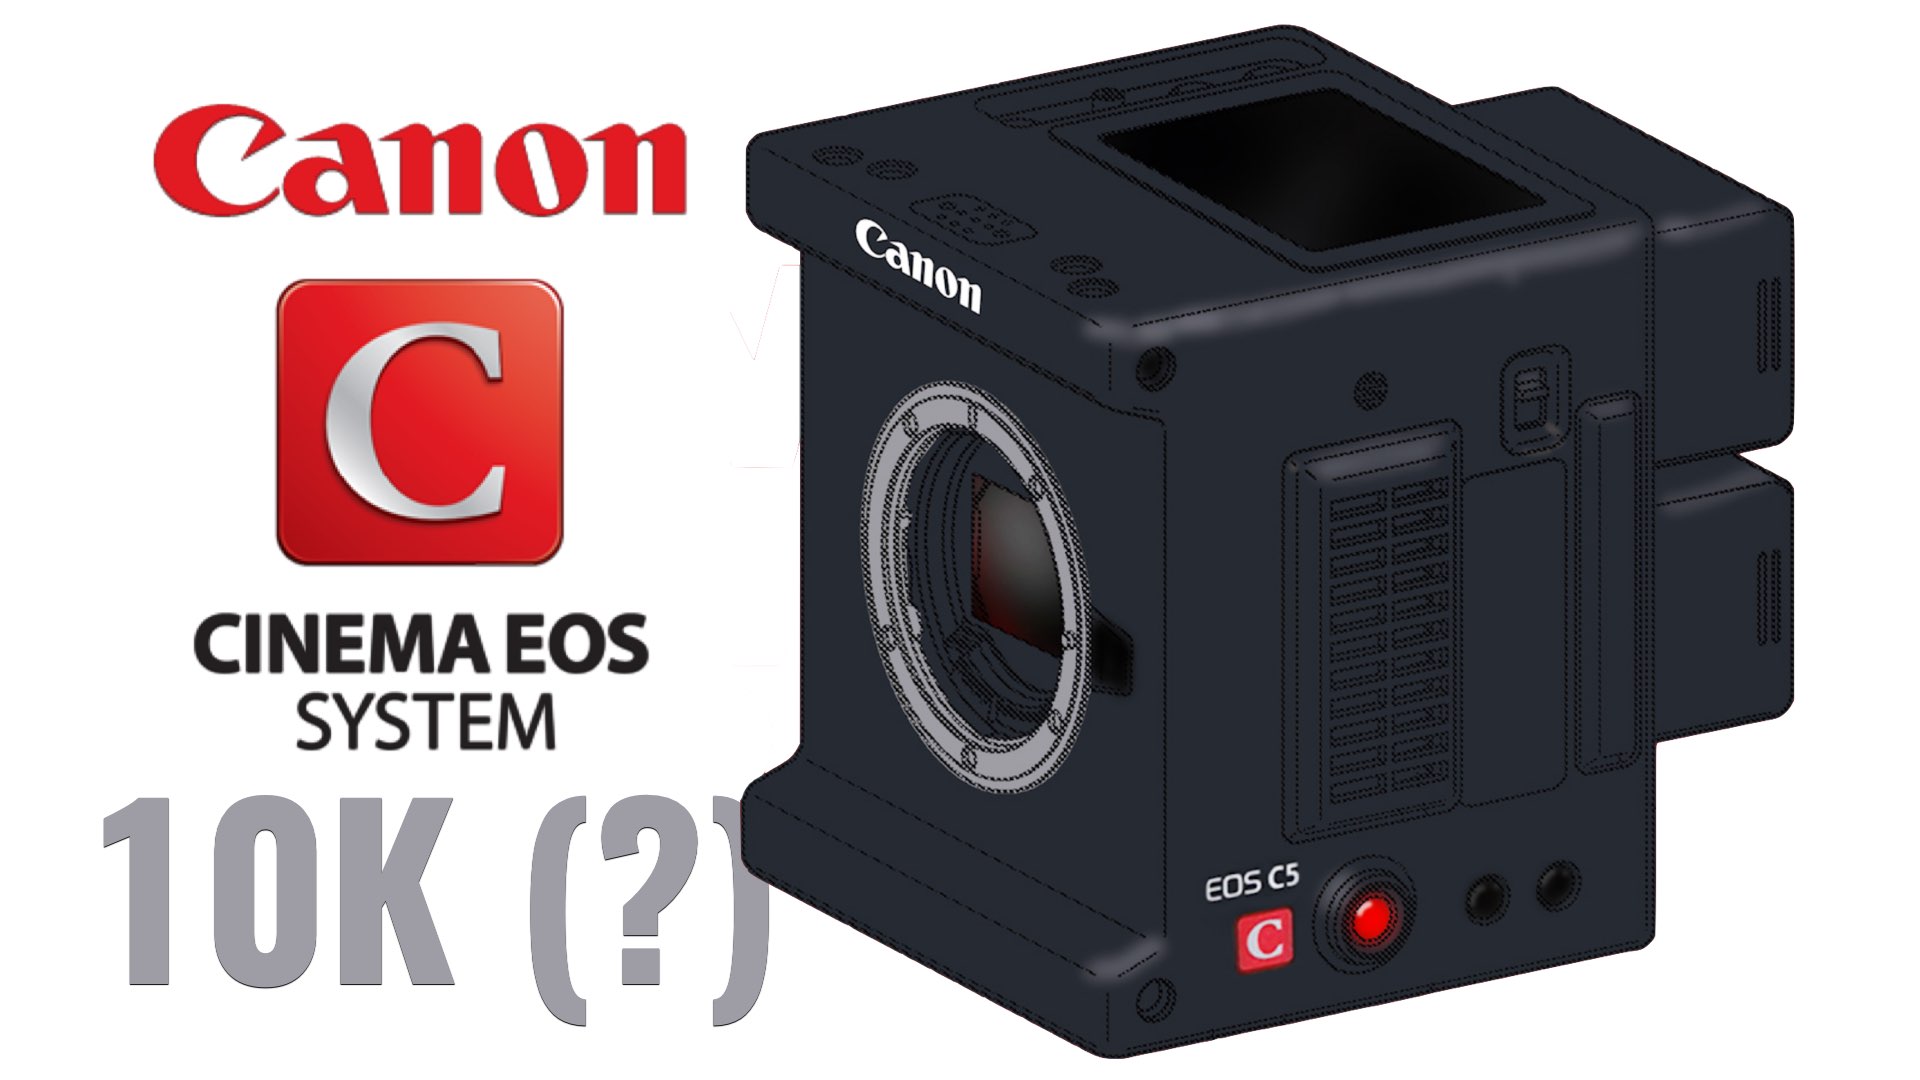 Canon Develops High-End Boxy Cinema Camera. Image rendering: Chung Dha